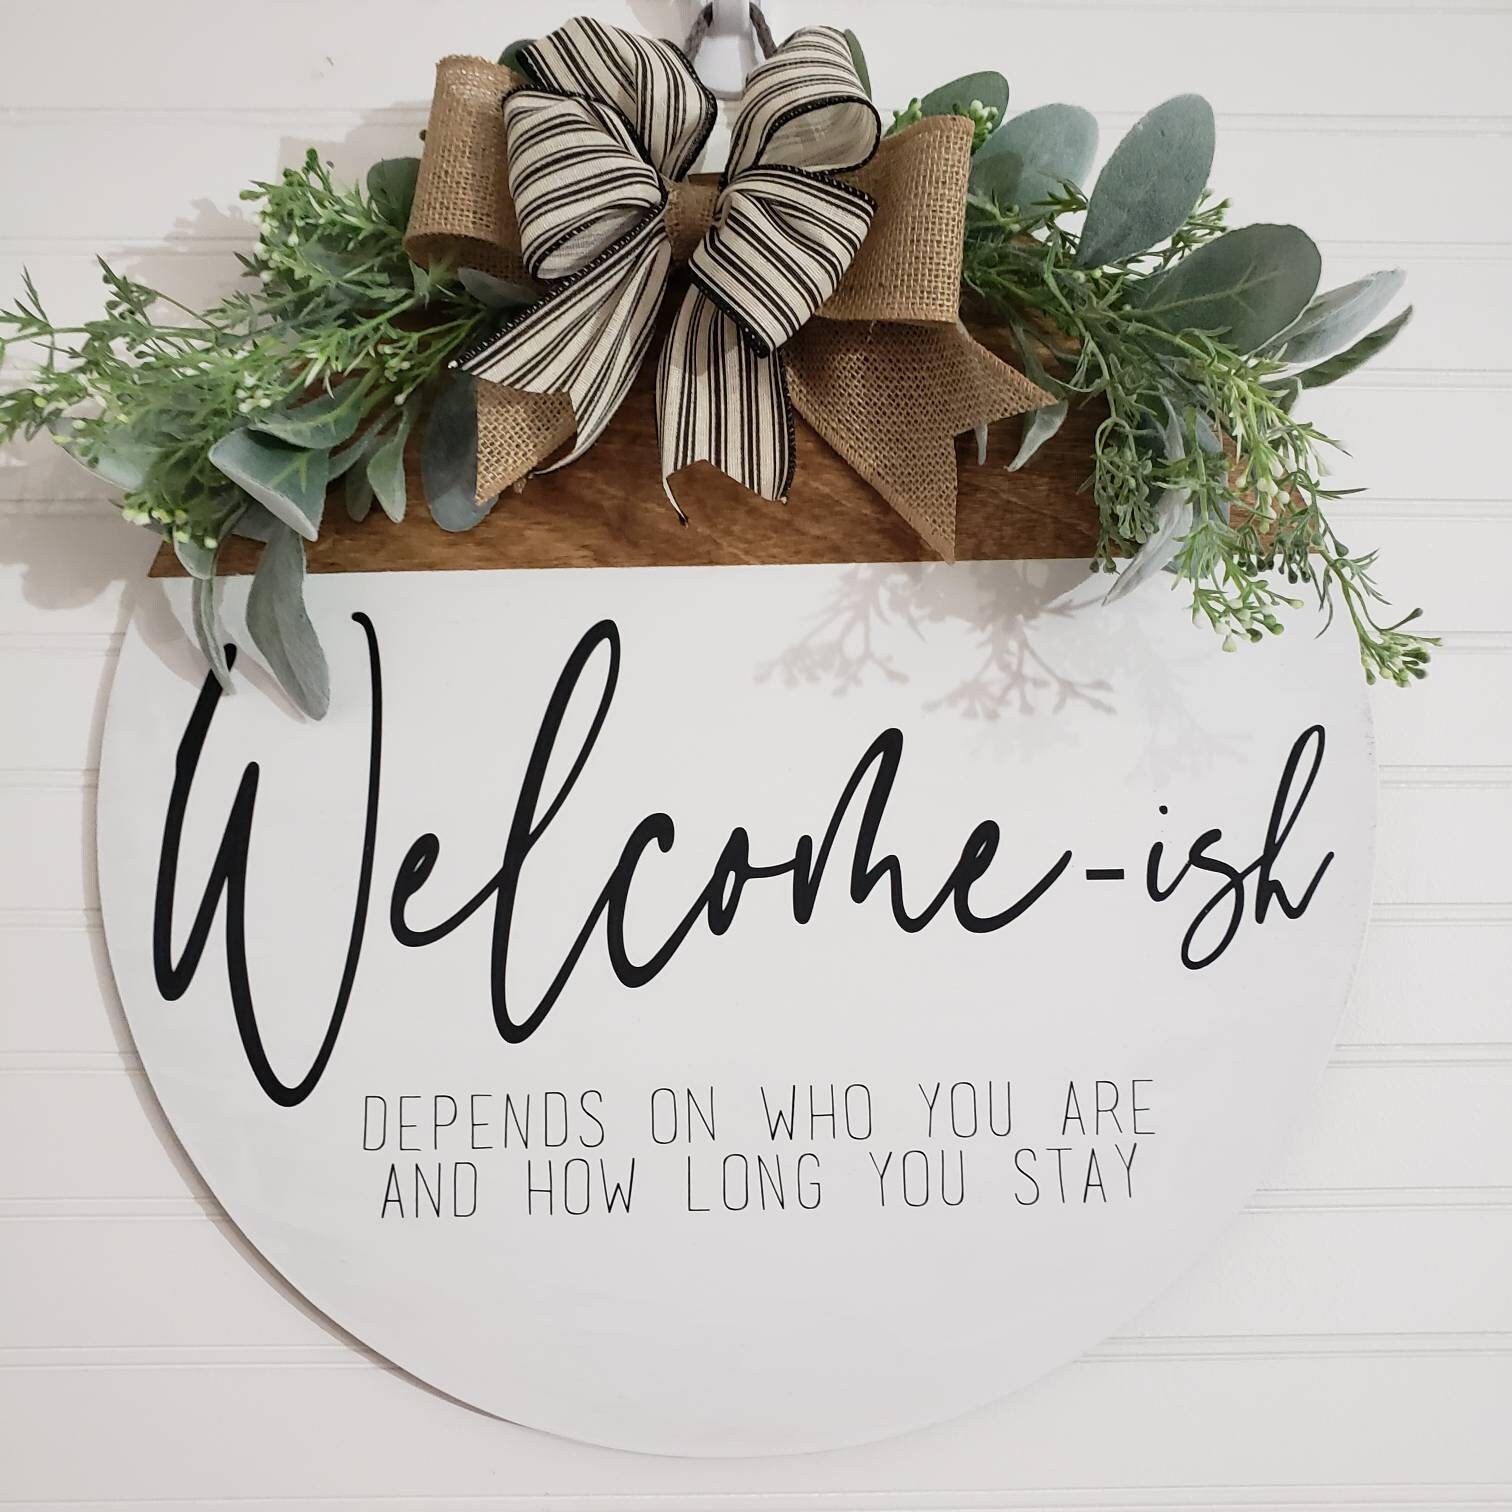 WELCOME-ISH. Depends on who you are and how long you're | Etsy